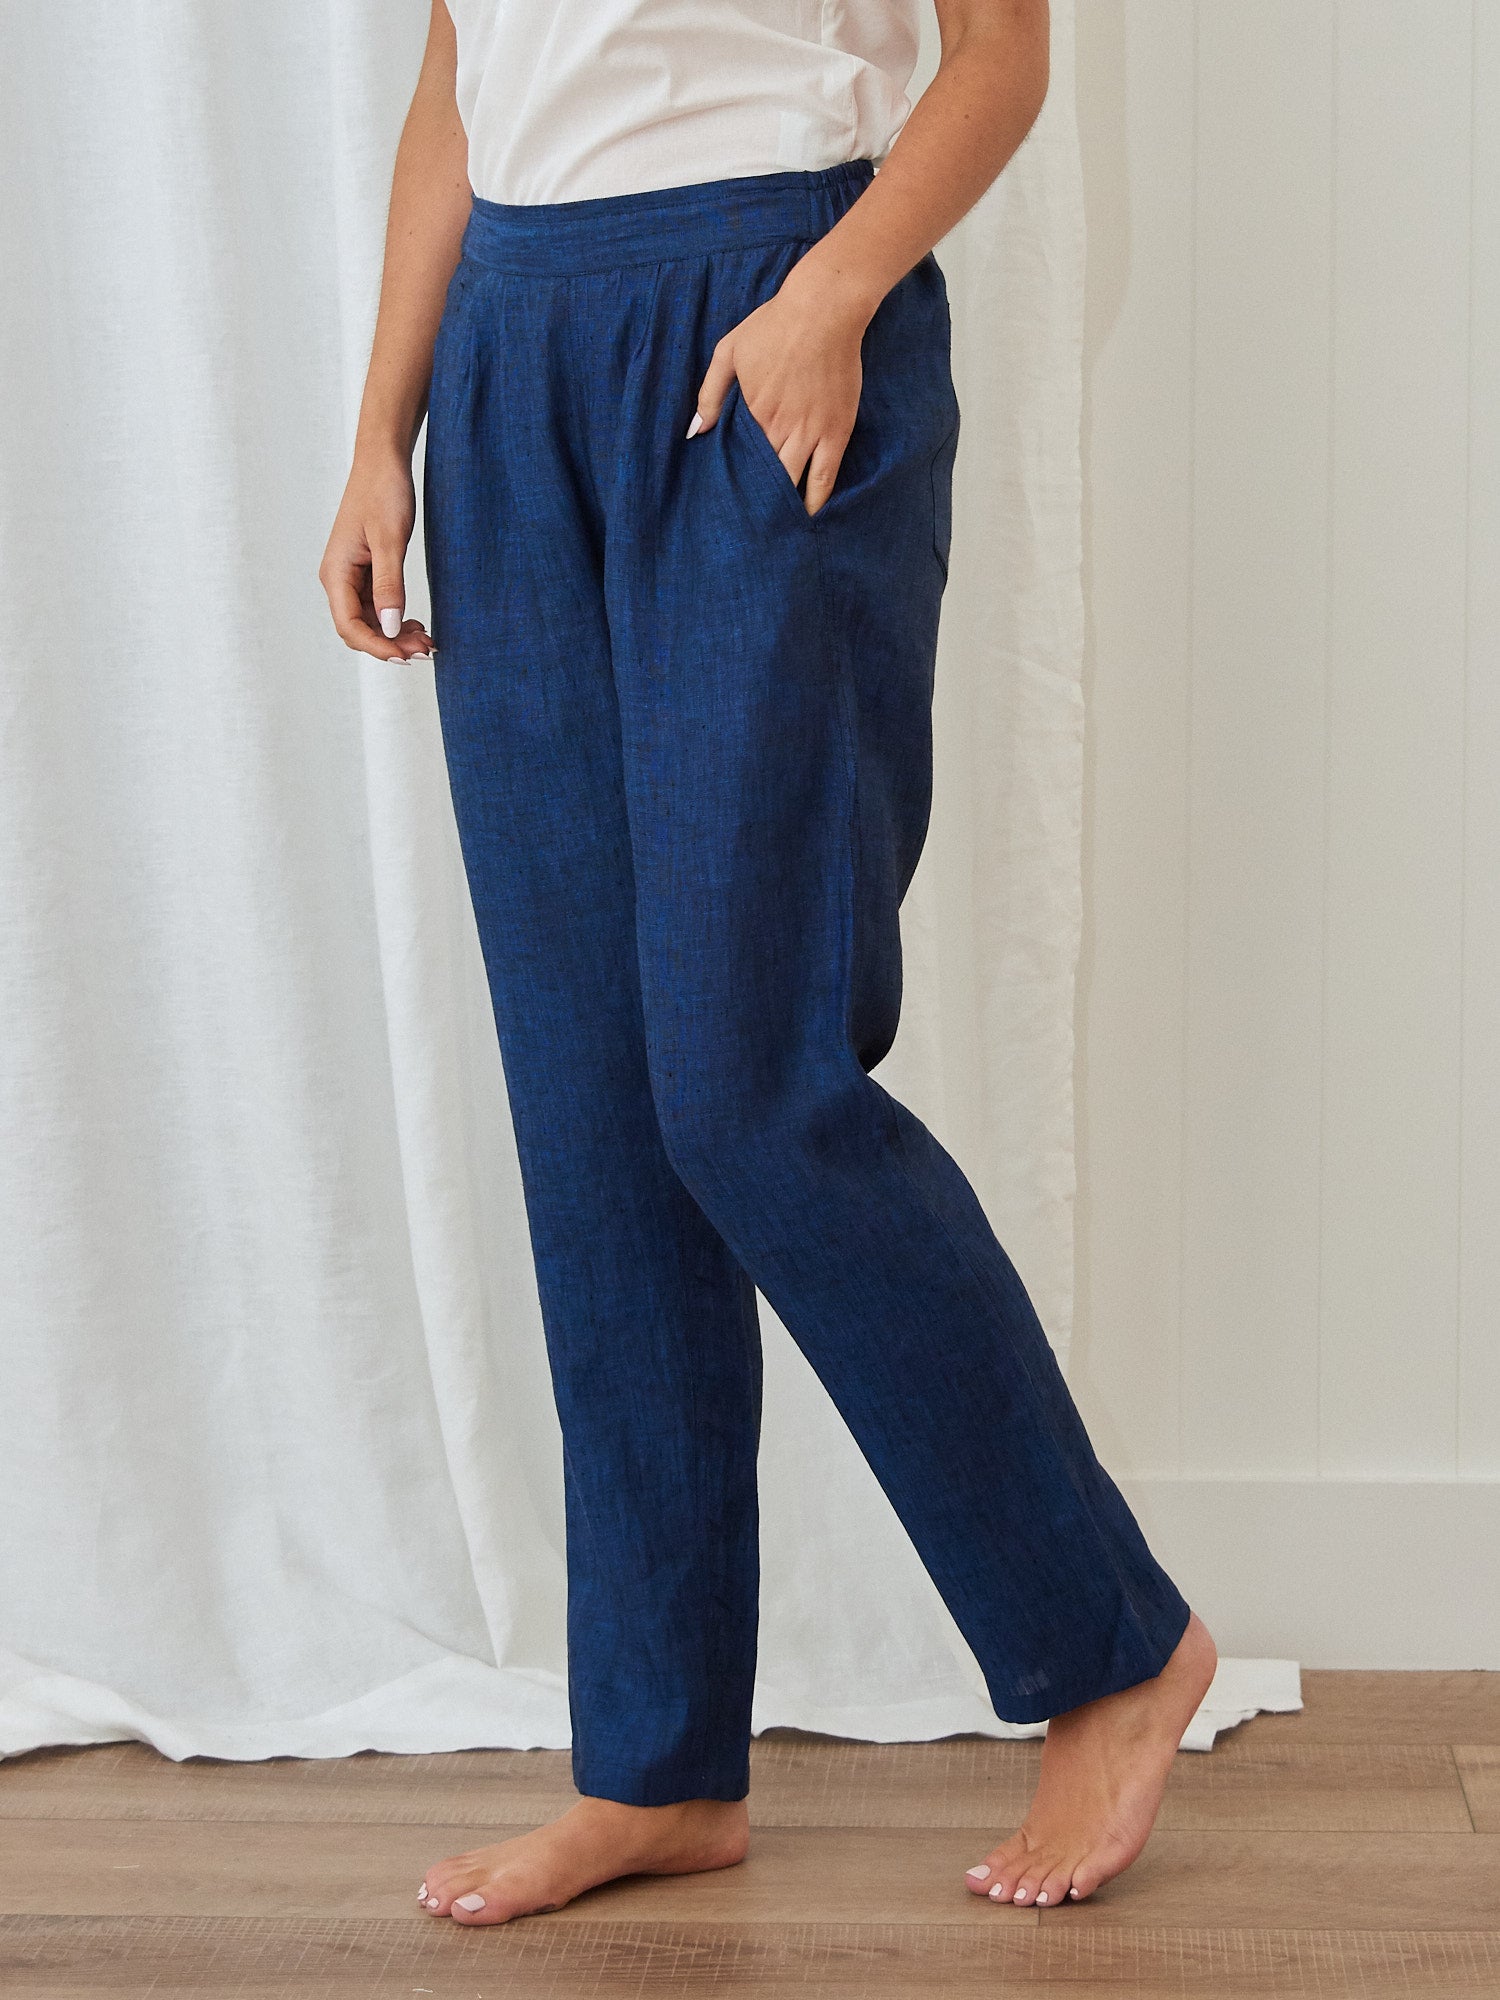 https://www.wallacecotton.com/content/products/voyager-linen-pants-blue-chambray-1-9174.jpg?width=1500